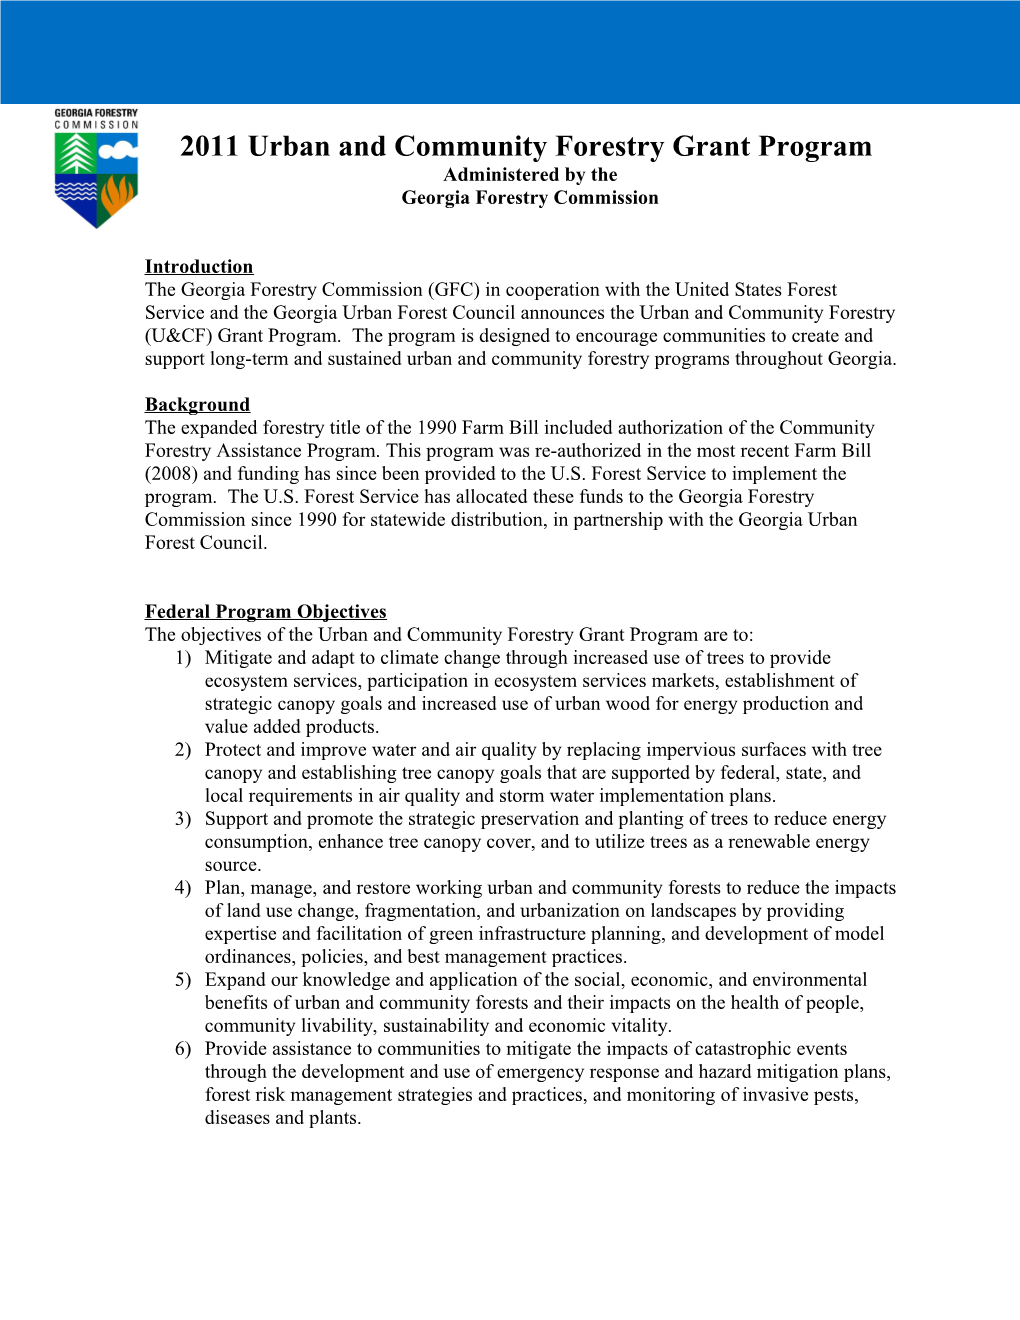 2011Urban and Community Forestry Grant Program